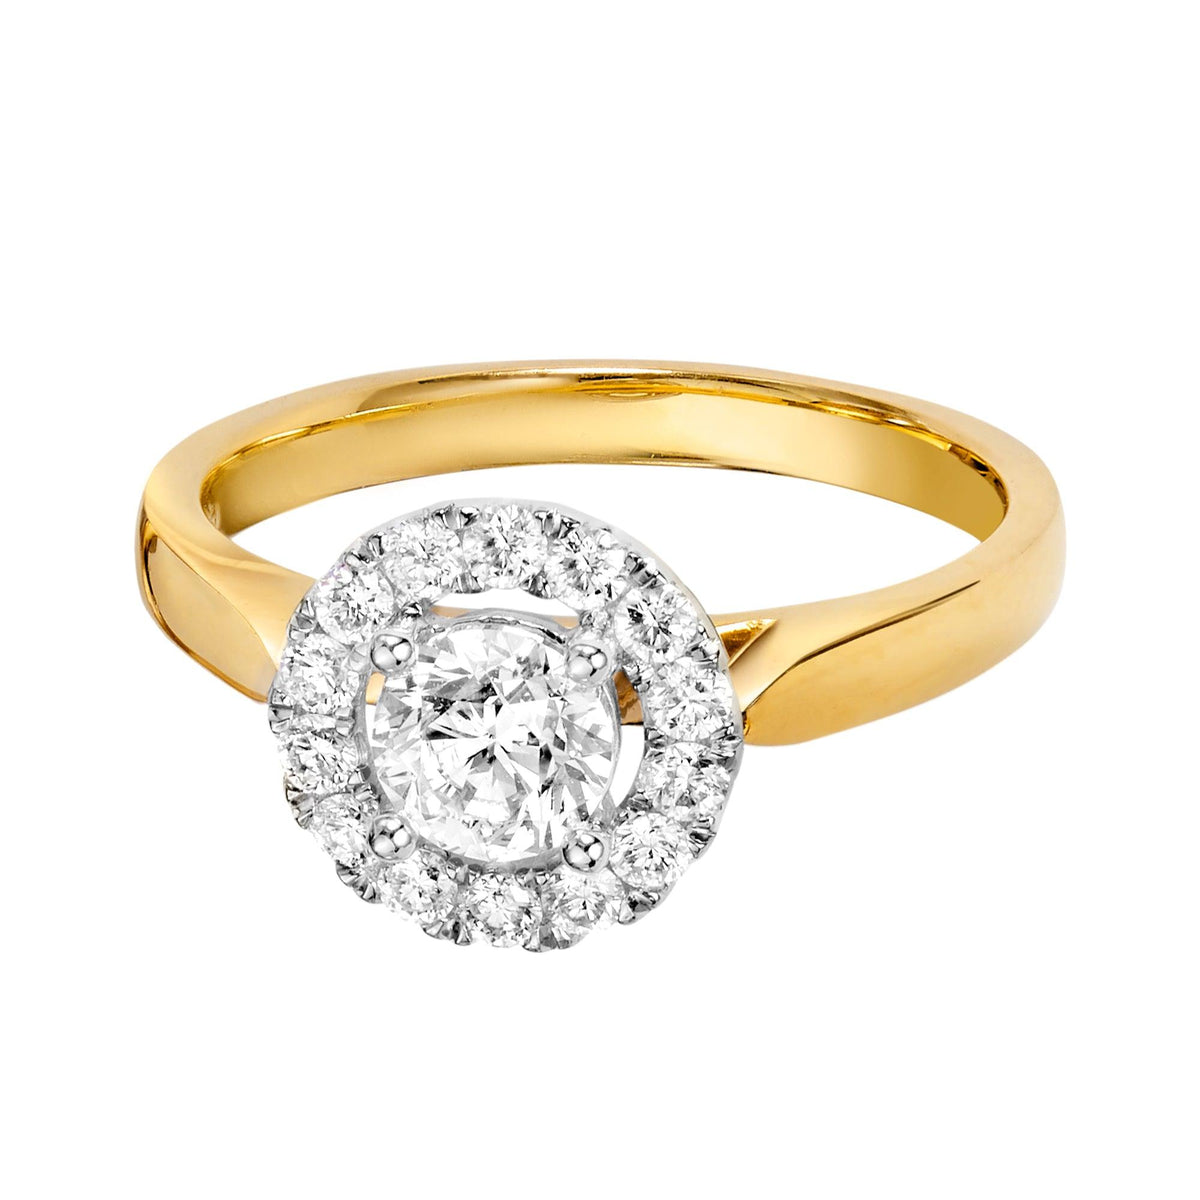 0.75ct TW Diamond Halo Engagement Ring in 18ct Yellow Gold - Wallace Bishop